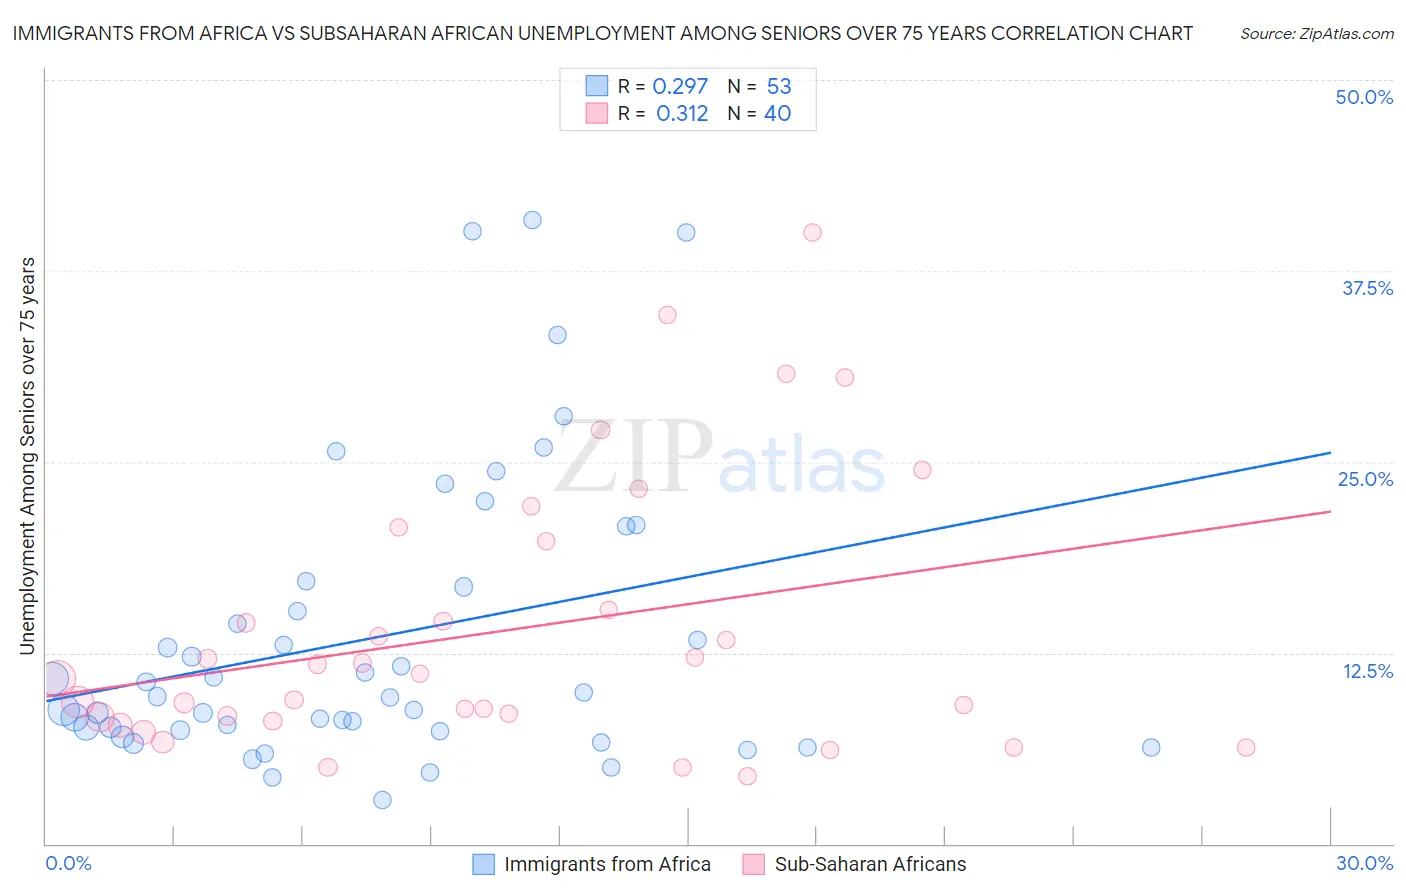 Immigrants from Africa vs Subsaharan African Unemployment Among Seniors over 75 years